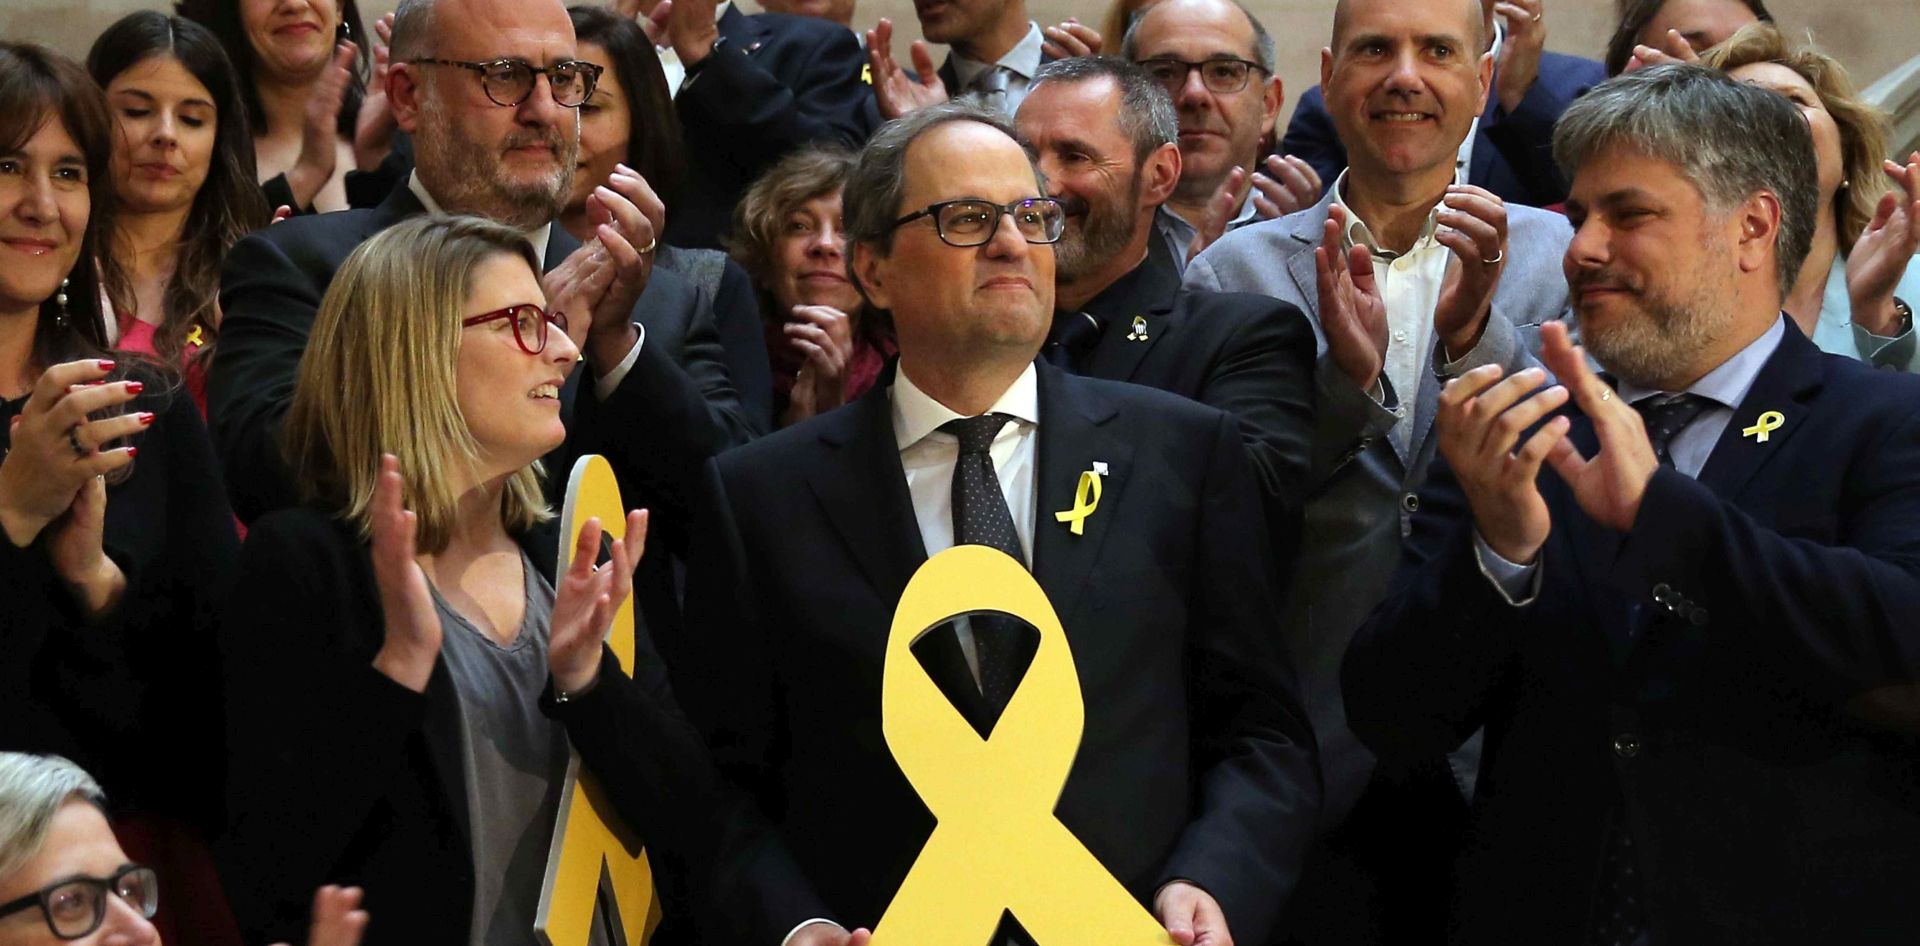 epa06736020 New Catalan regional Government President, Quim Torra (C), poses with a yellow ribbon as he is congratulated by party members after being elected by simple majority in the second and last investiture session at the regional Parliament in Barcelona, northeastern Spain, 14 May 2018.  EPA/Toni Albir